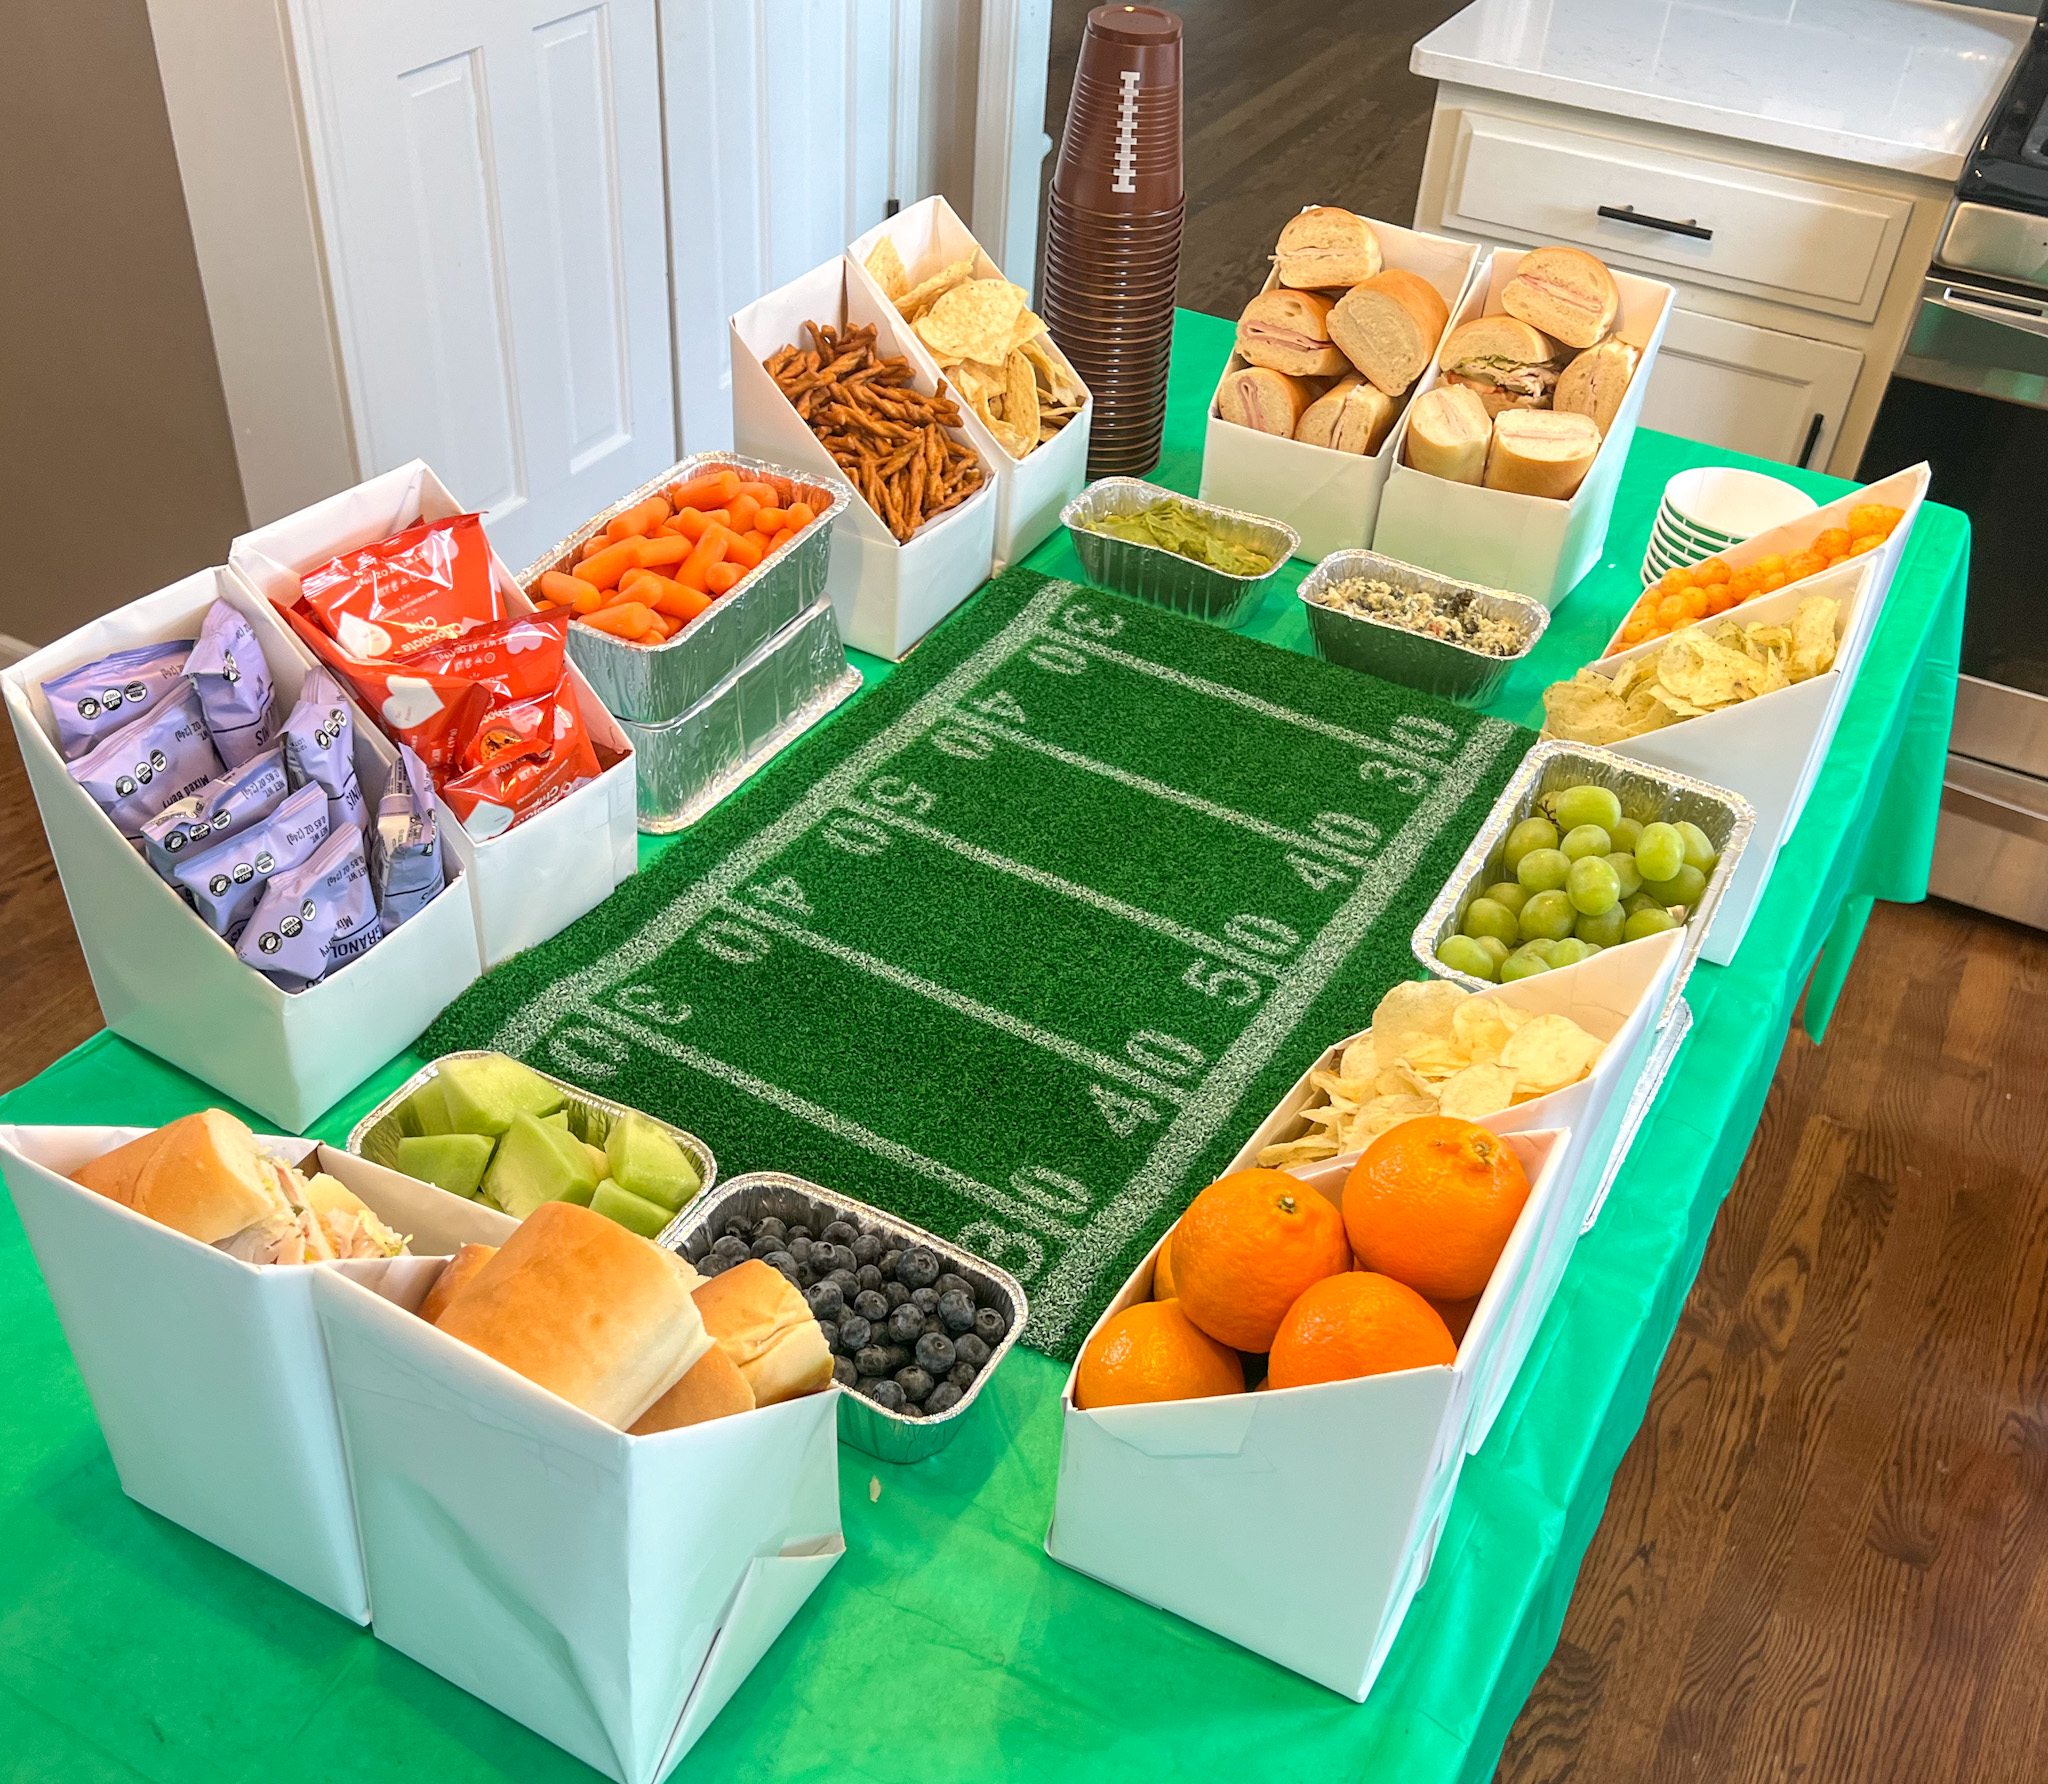 Football Snack Stadium – Easy Guide to Make a Snack Stadium